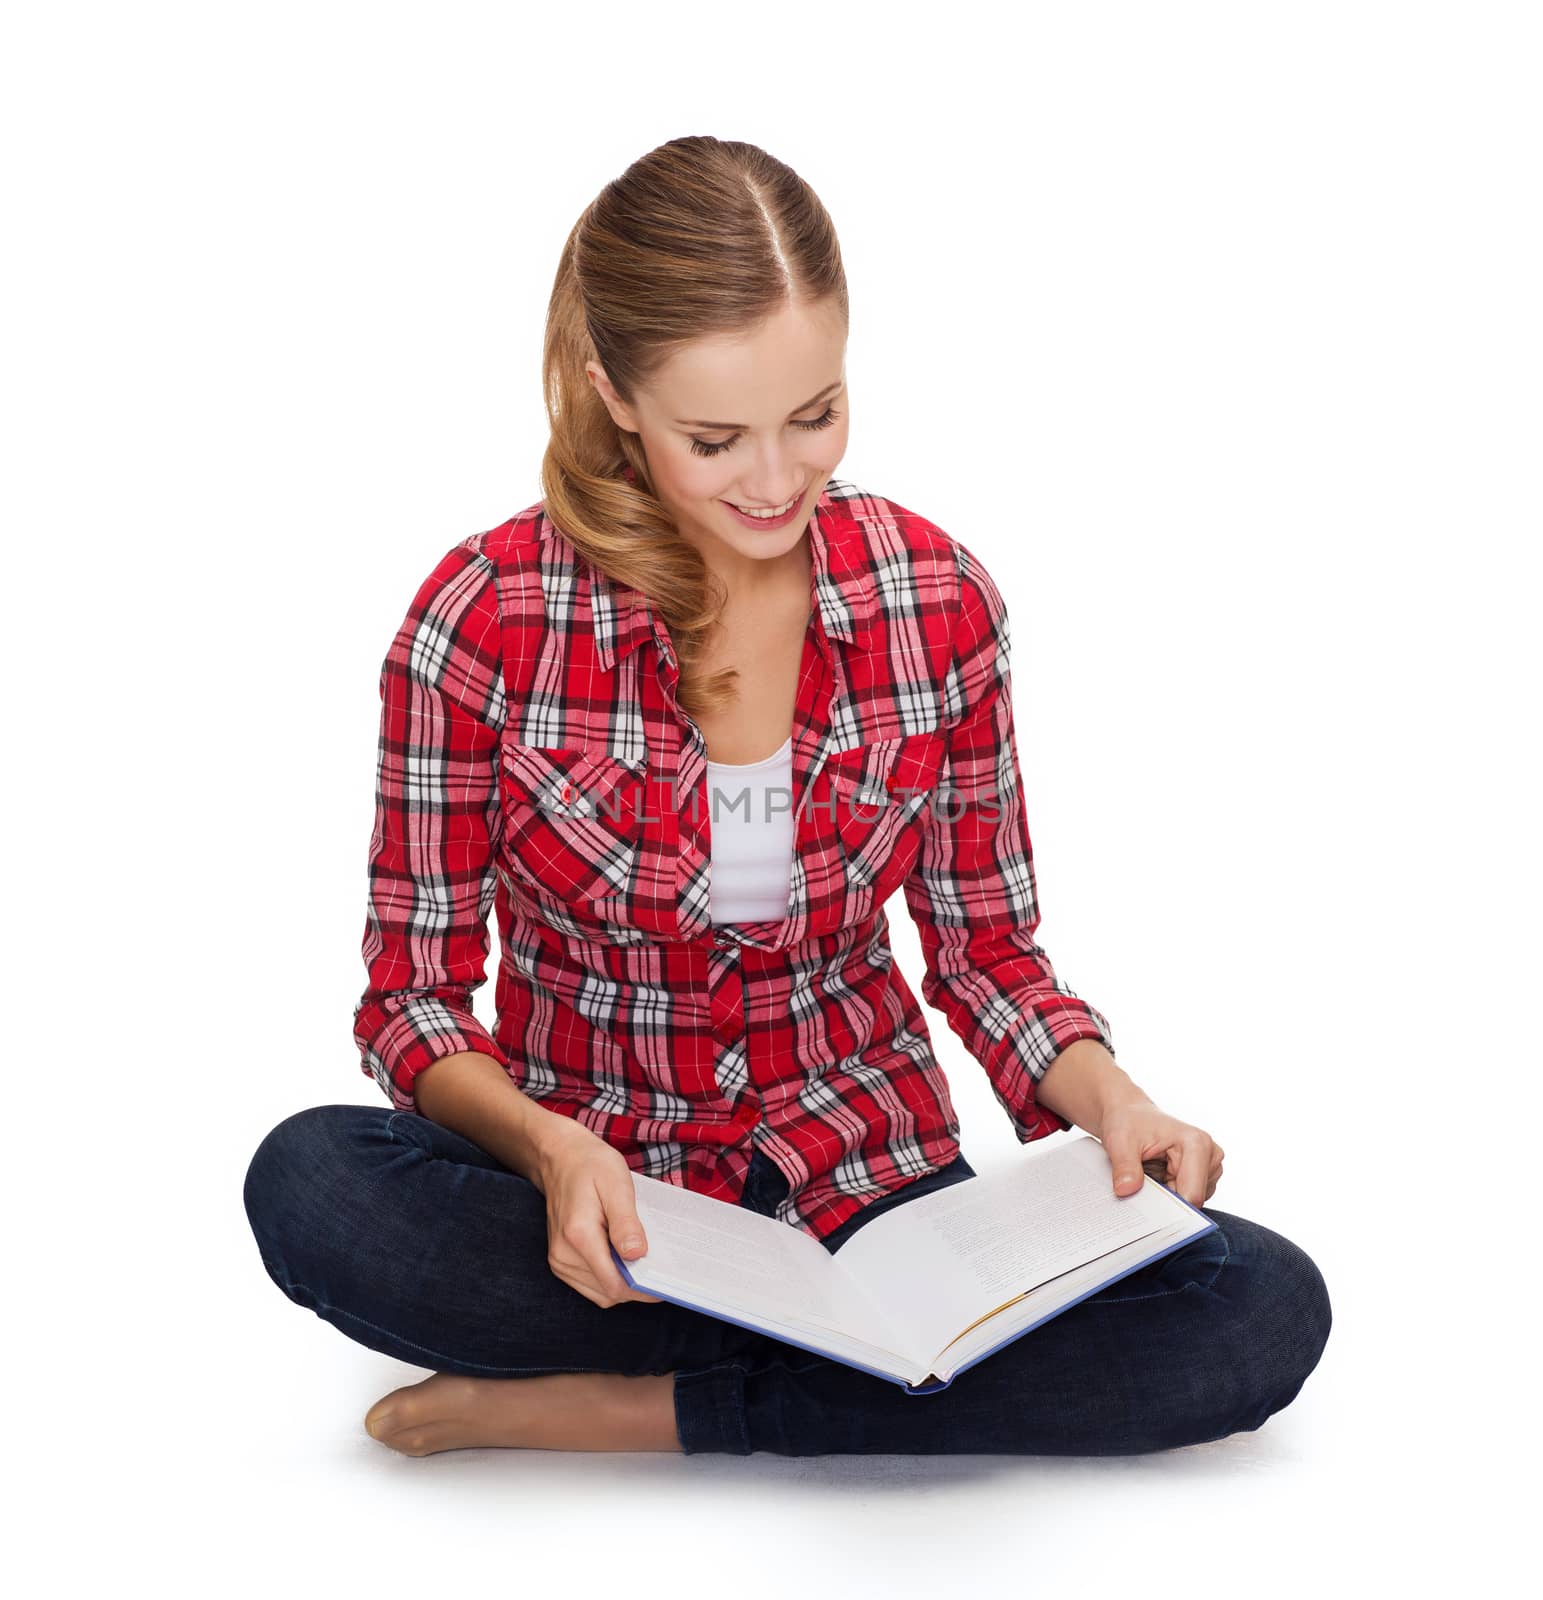 smiling young woman sitting on floor with book by dolgachov